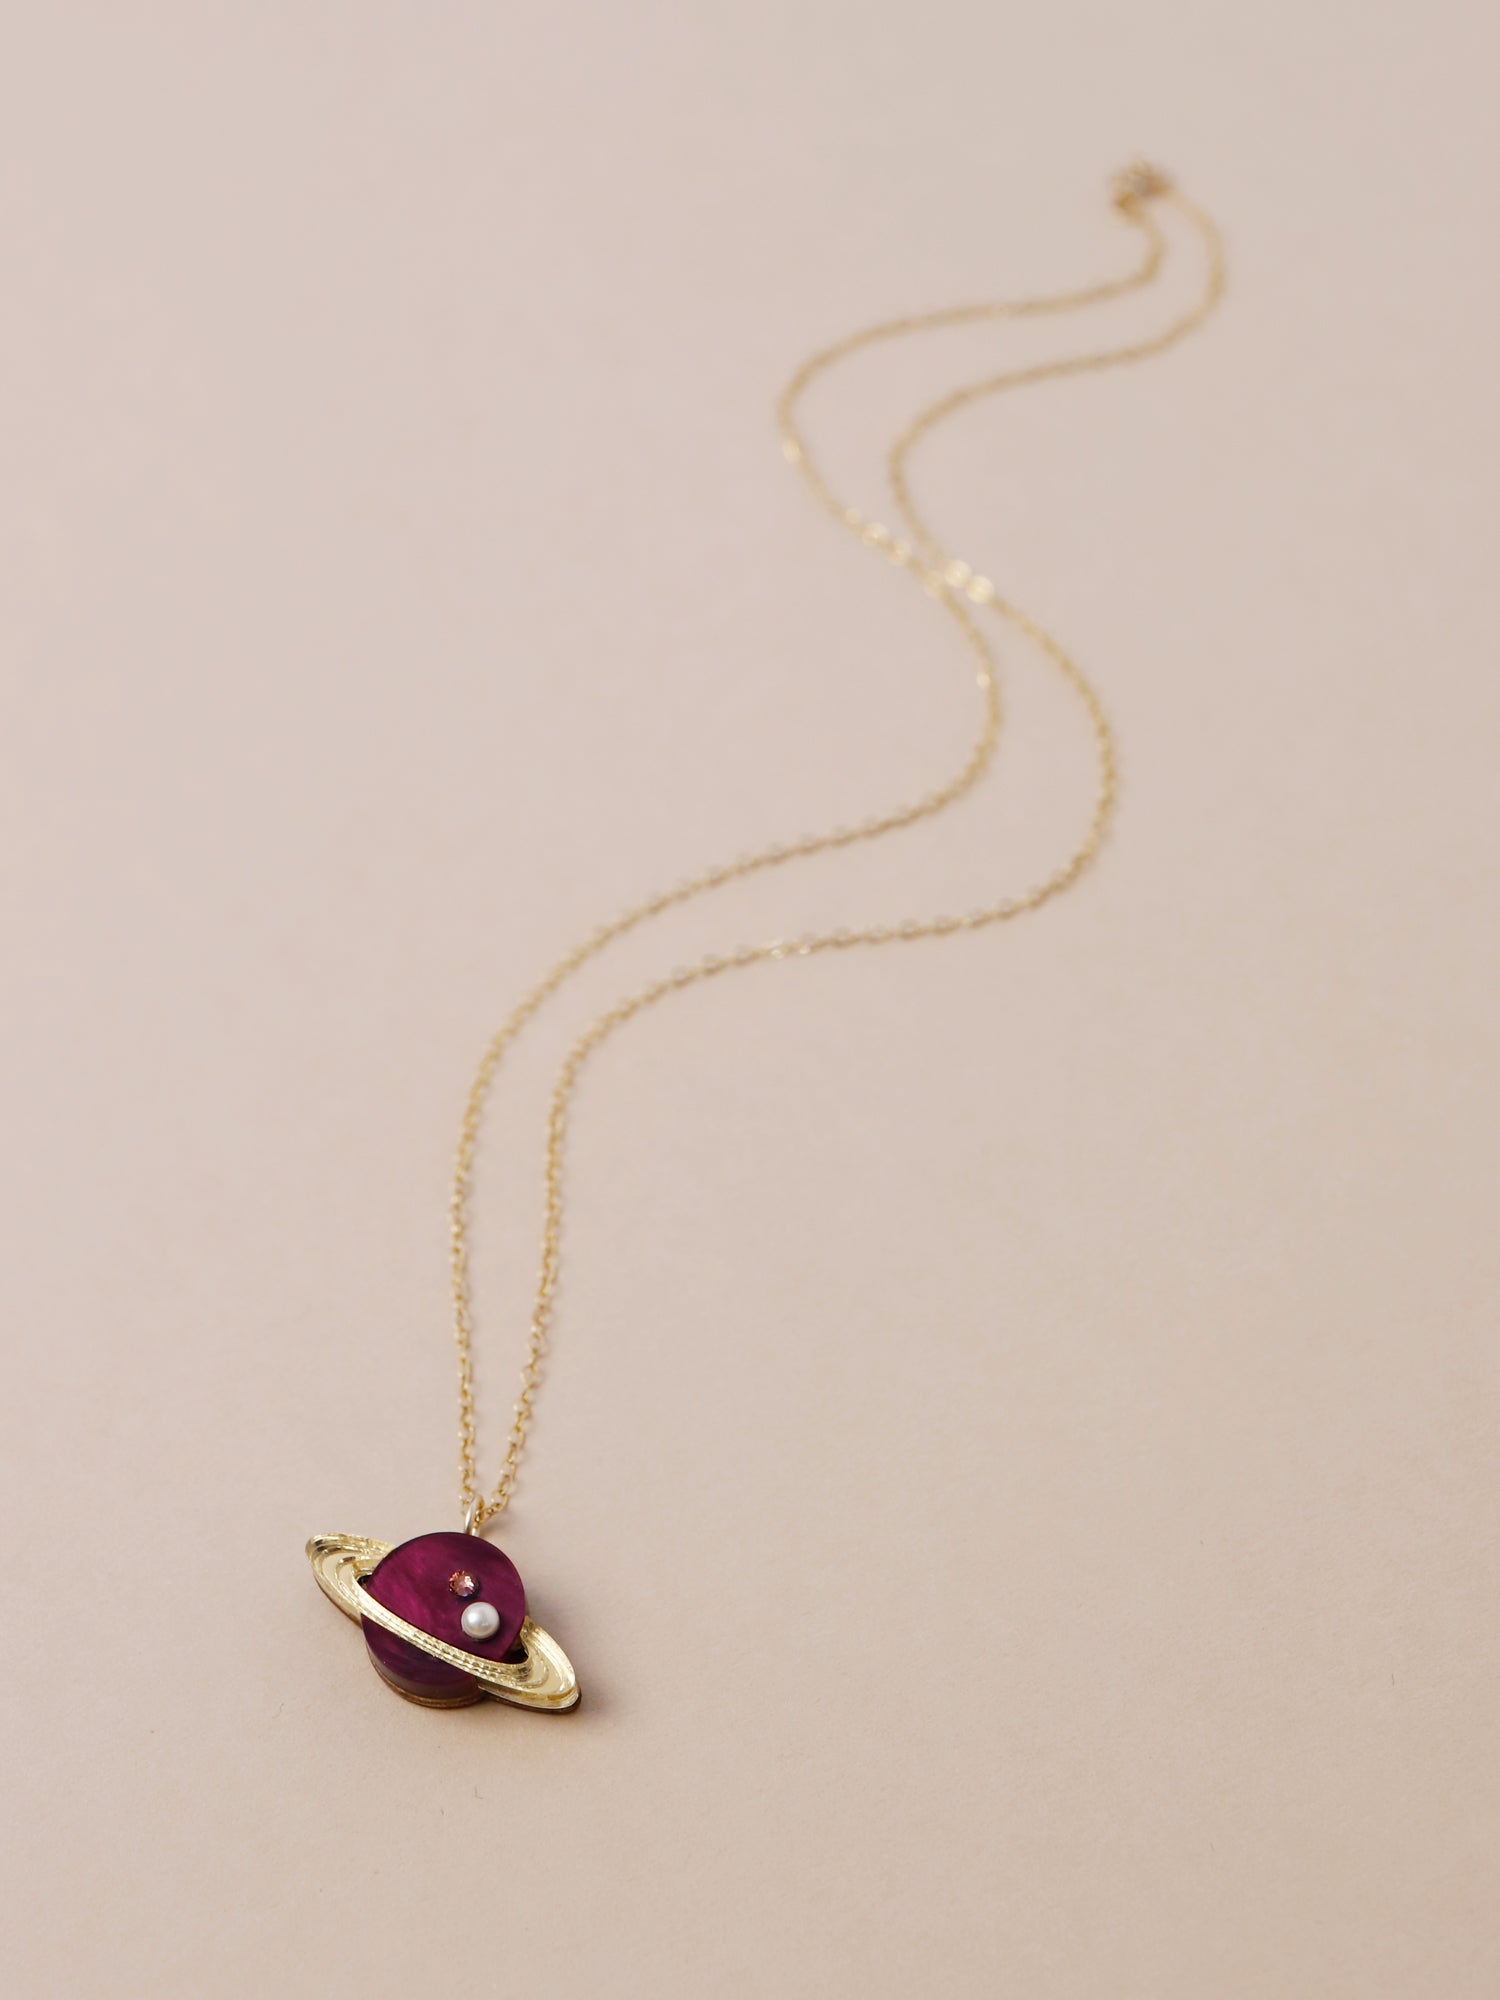 Saturn Necklace in Cherry